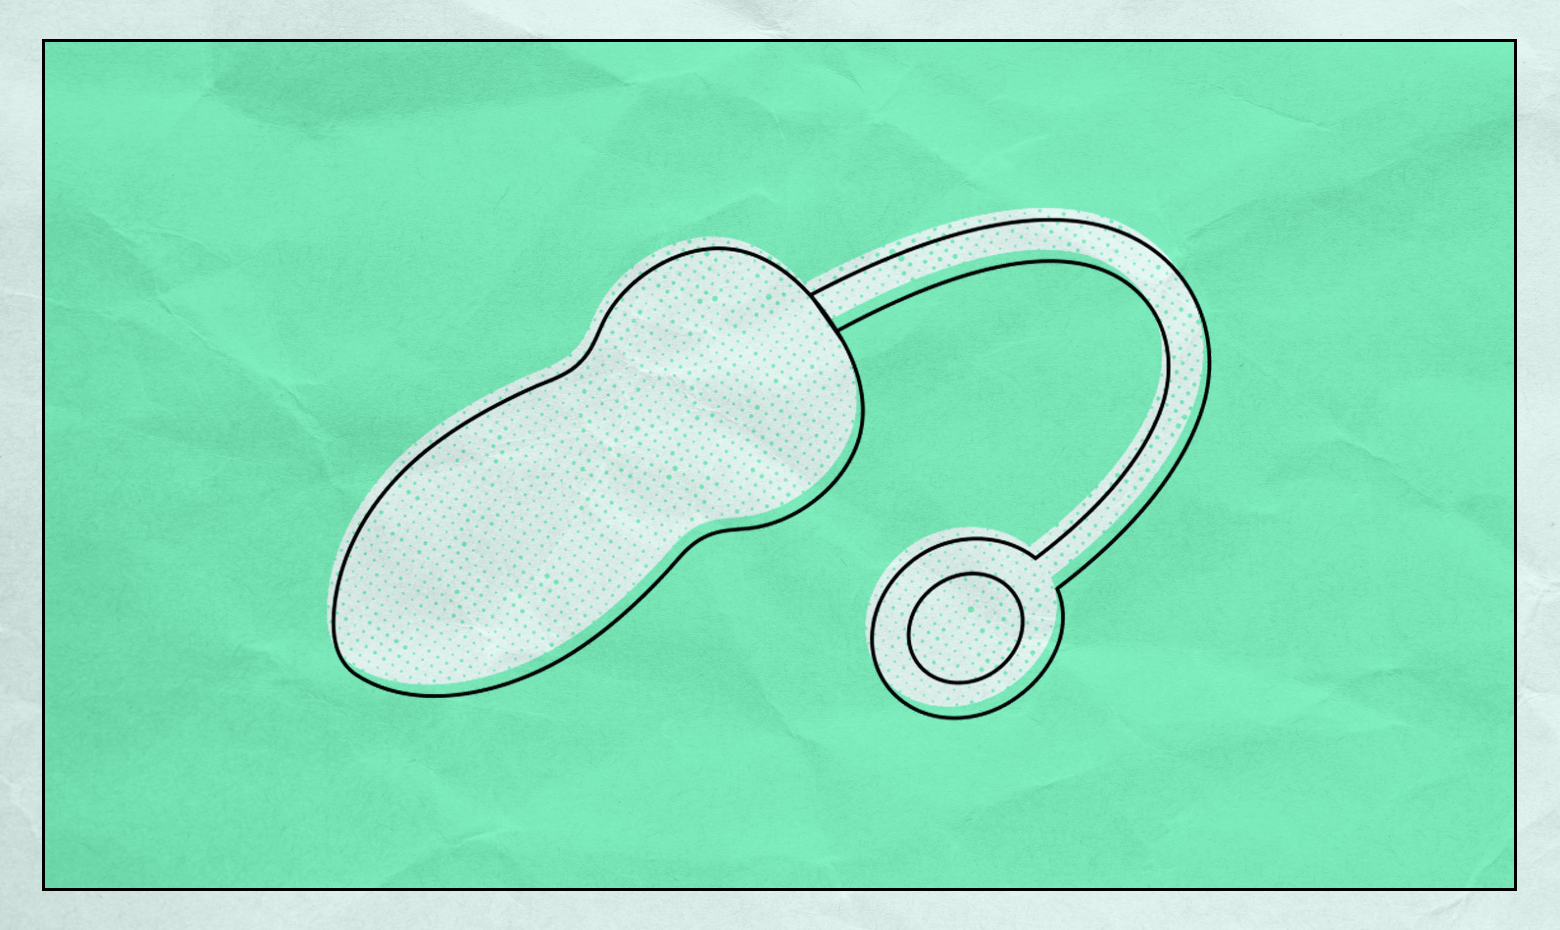 An illustration of an egg-shaped toy with a flared base and pull cord with loop